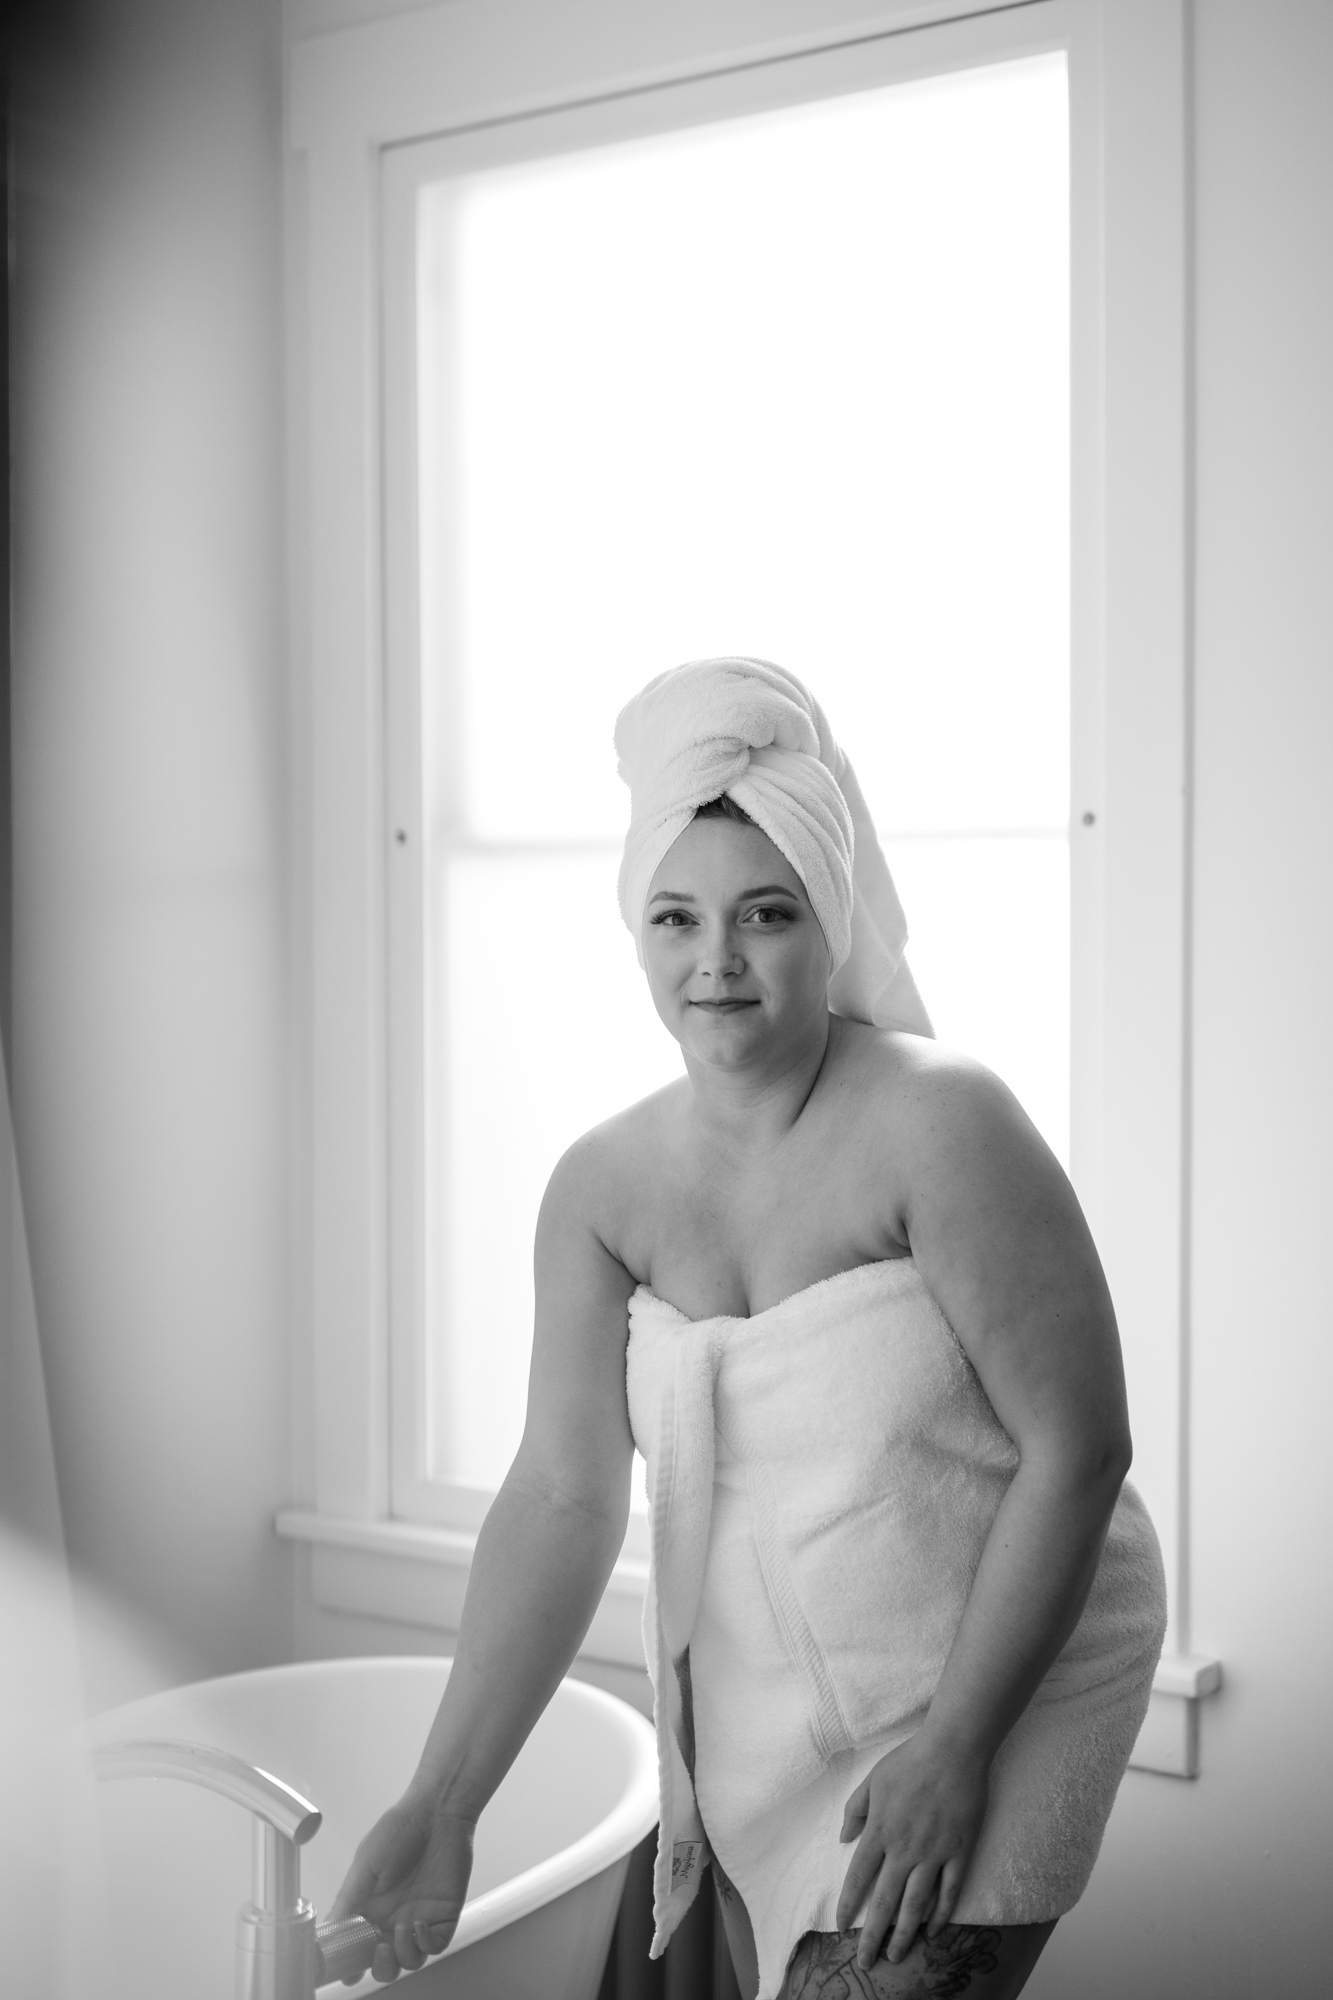 https://lilacandfernphotography.com/wp-content/uploads/2022/03/Boudoir-Fort-Collins-Colorado-Lilac-and-Fern-AS-Tub-12.jpg